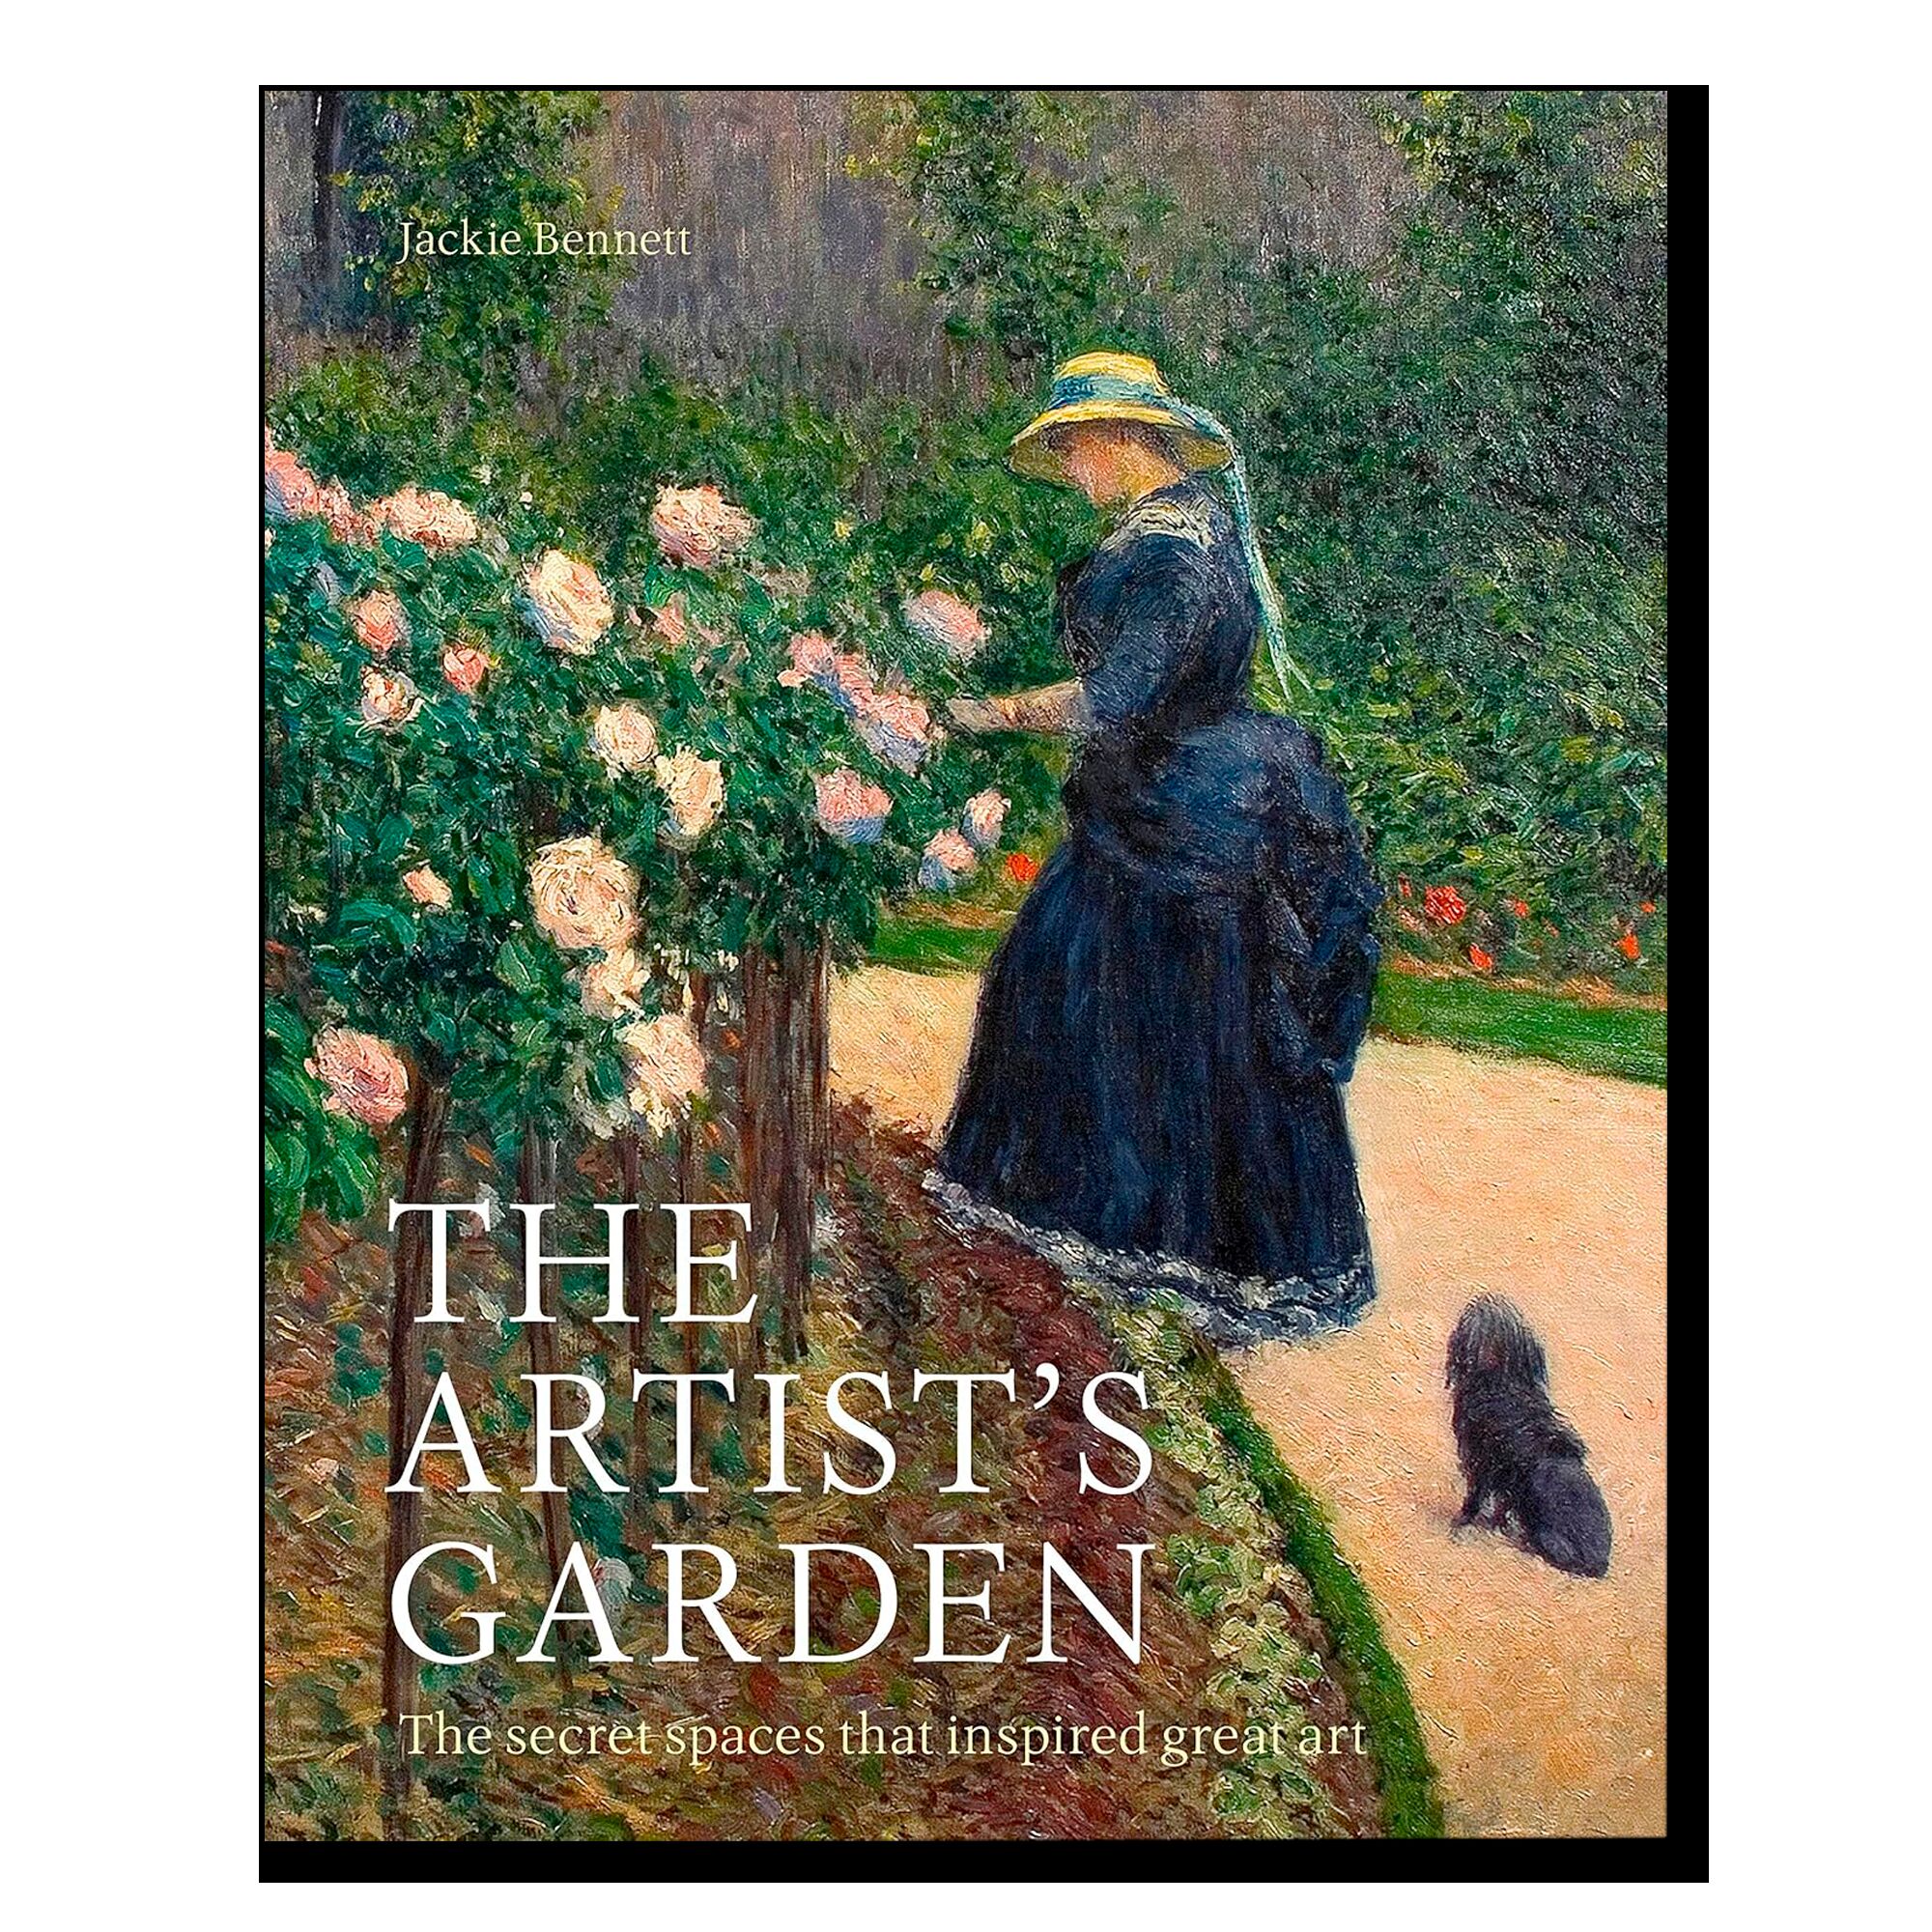 The Artist's Garden: The secret spaces that inspired great art